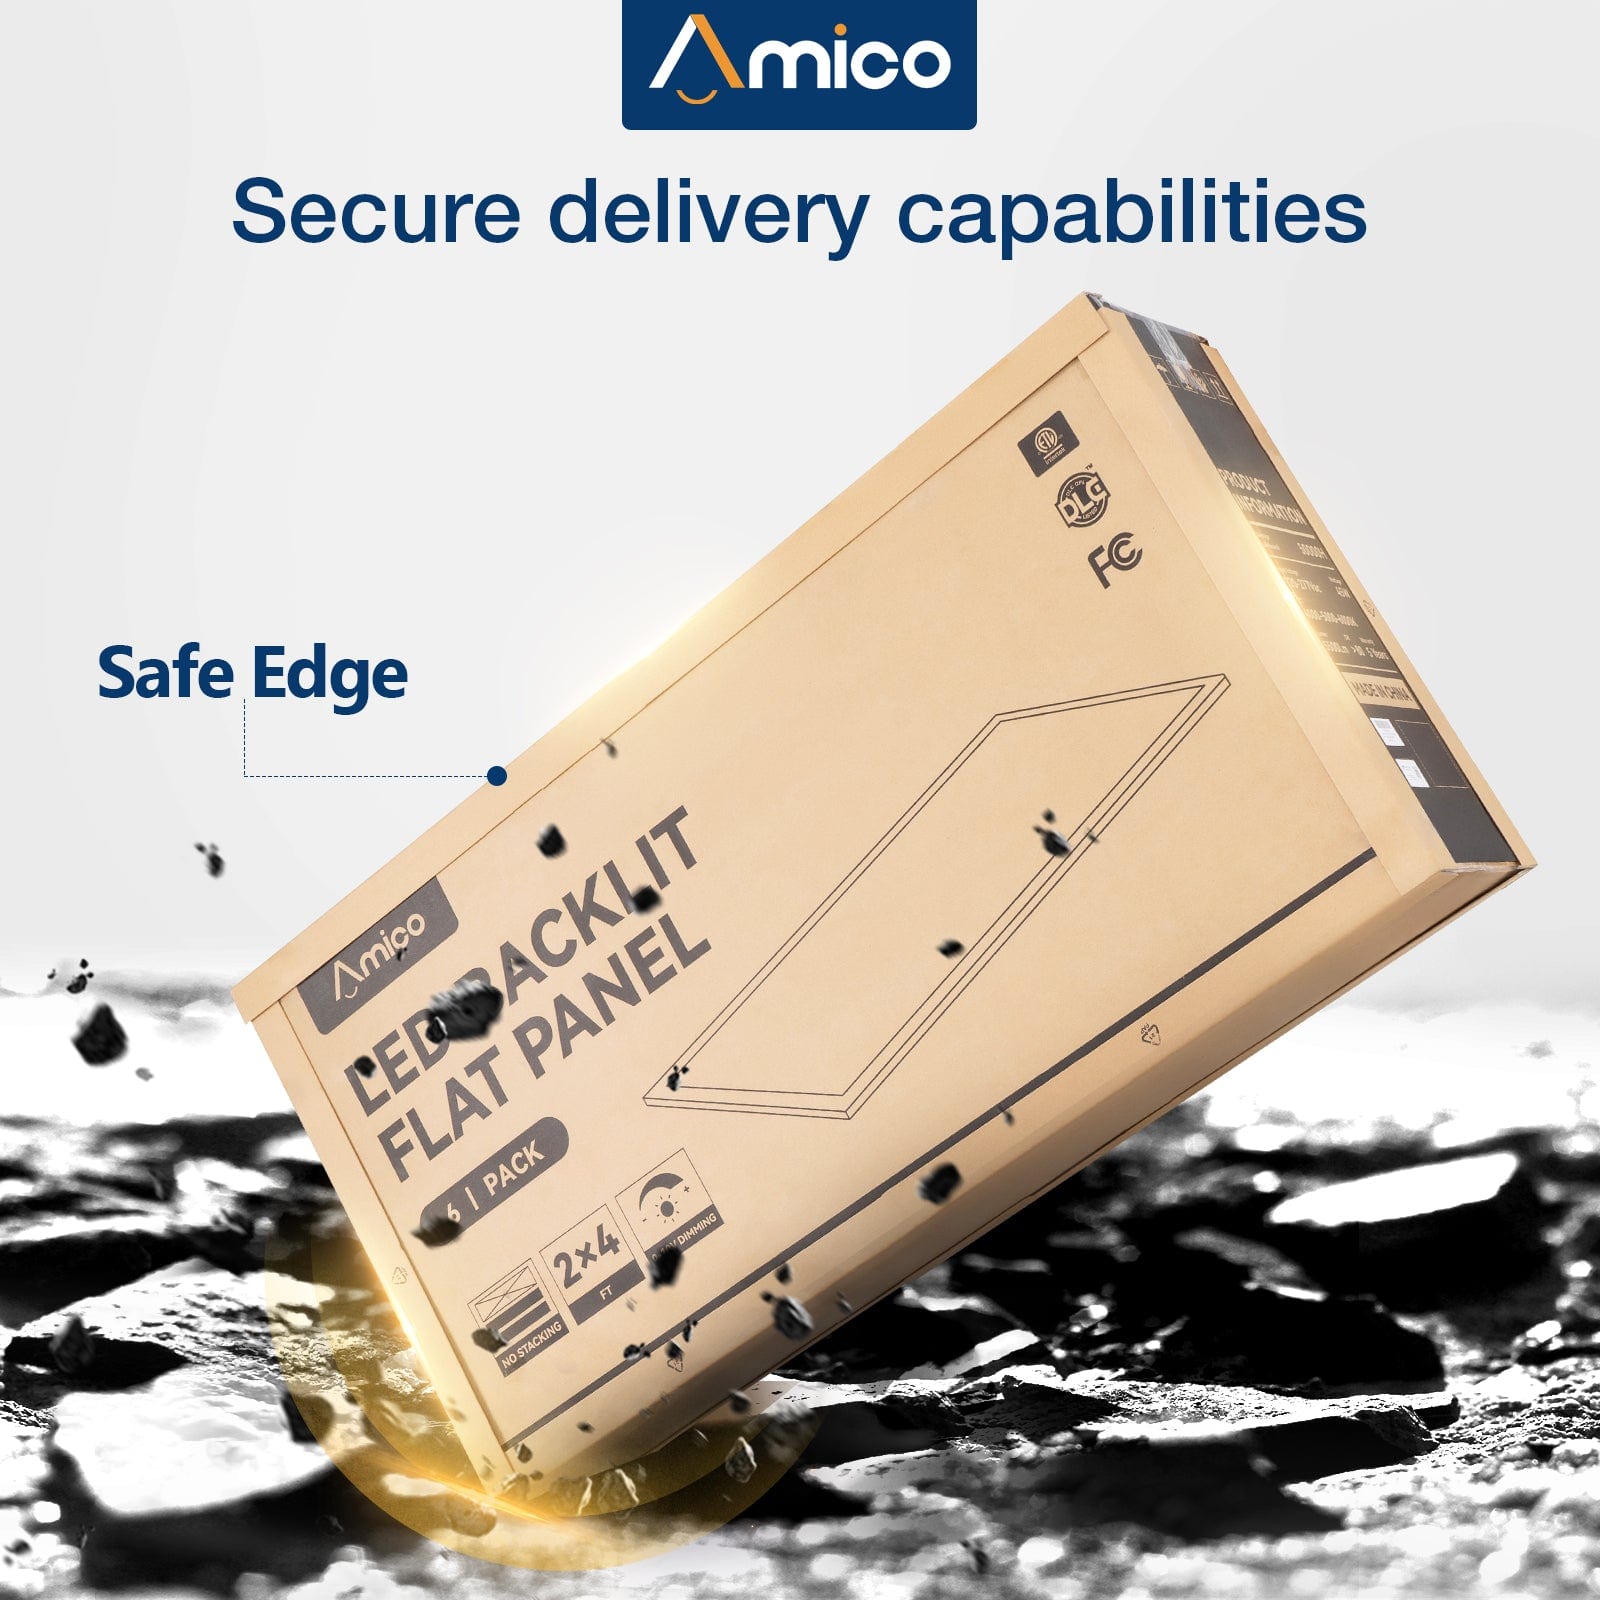 Safe Edge for secure delivery capabilities of led flat panel lights